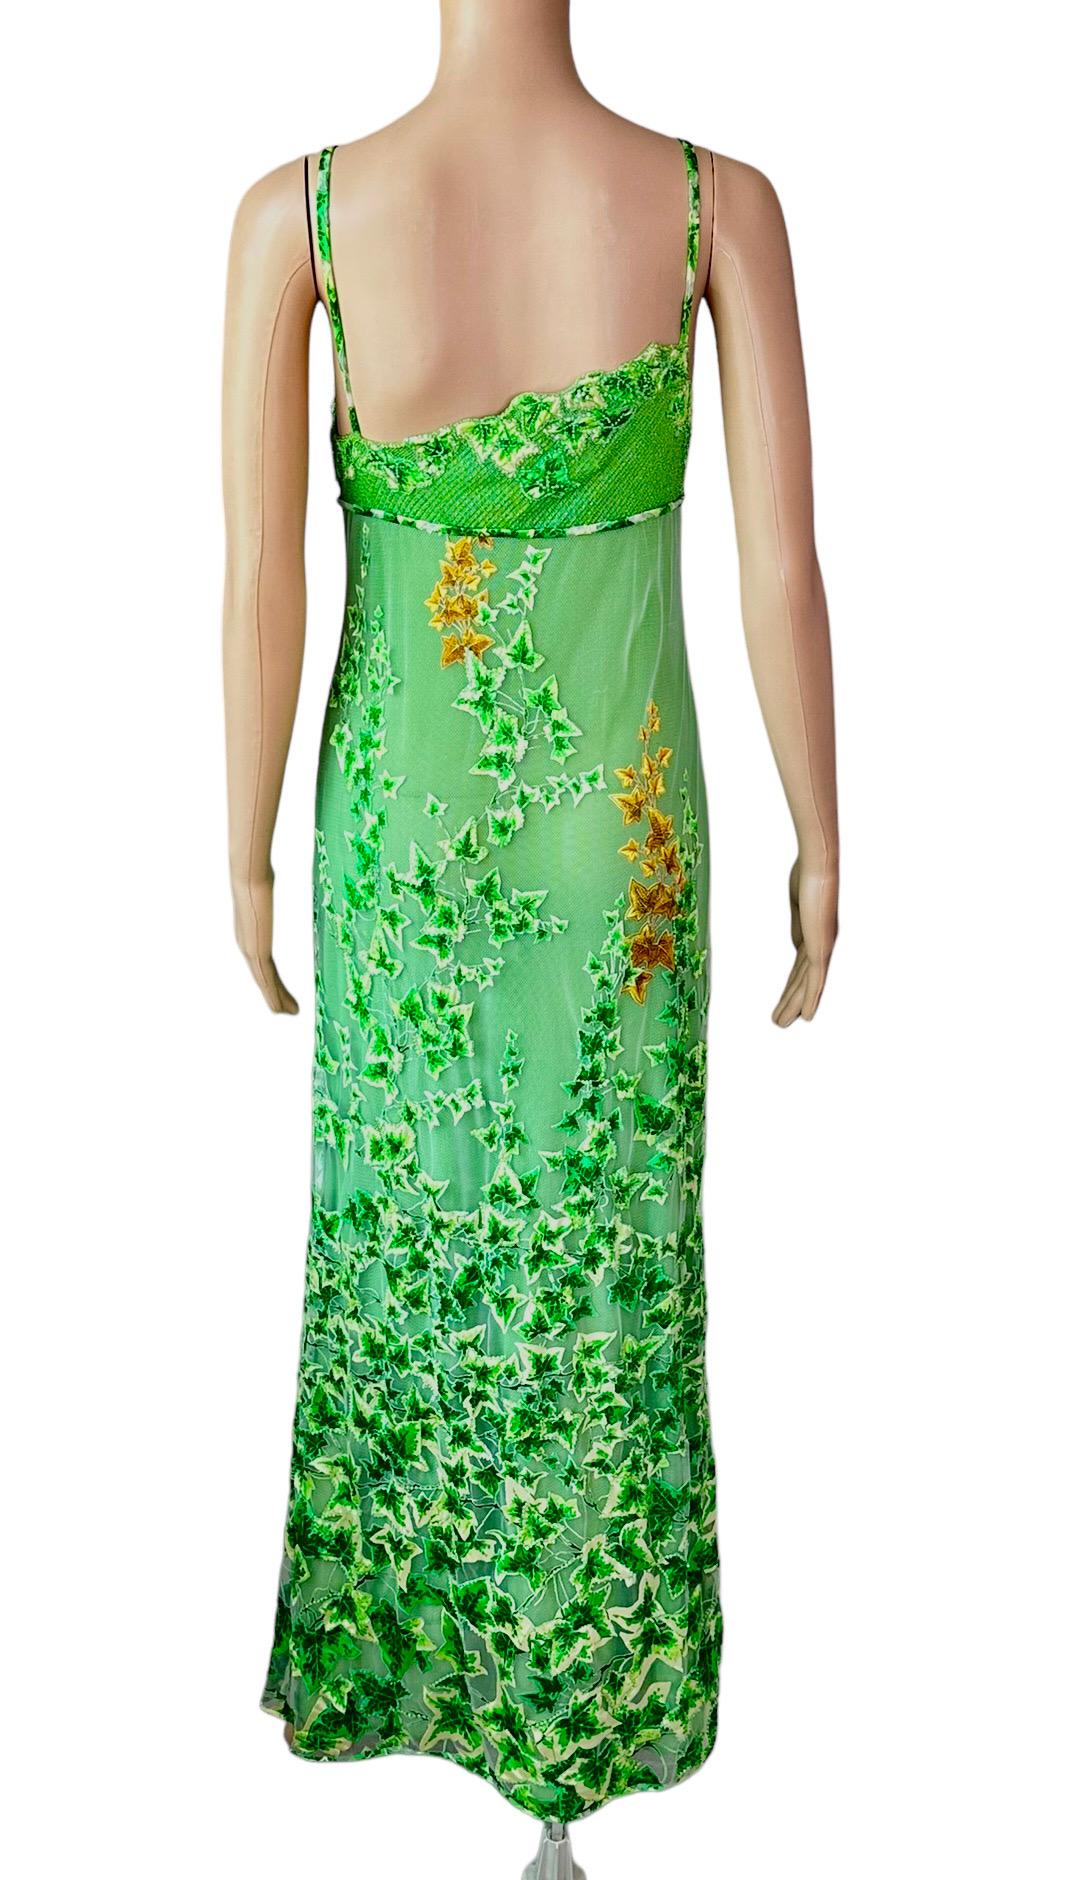 Women's Gianni Versace S/S 1997 Runway Embellished Sheer Lace Shawl Evening Dress Gown  For Sale